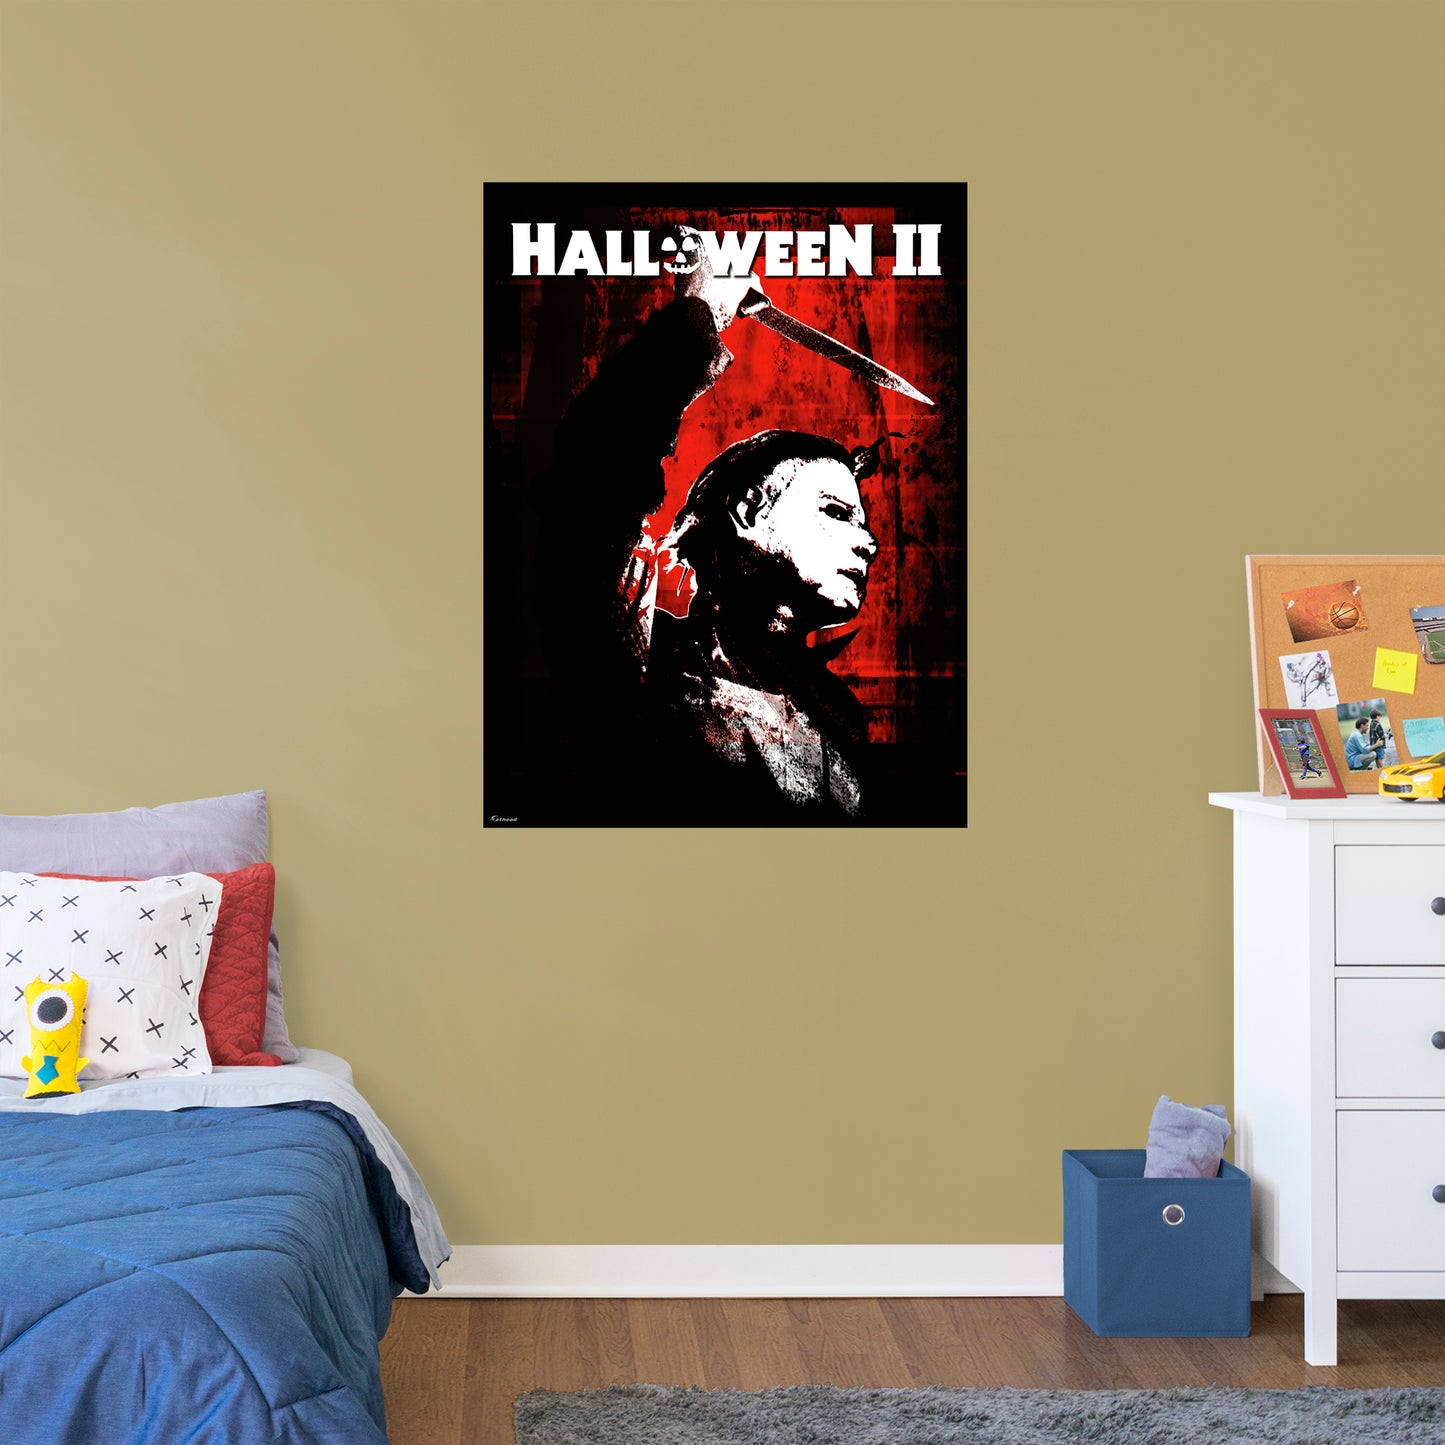 Halloween II:  Raised Knife Mural        - Officially Licensed NBC Universal Removable Wall   Adhesive Decal